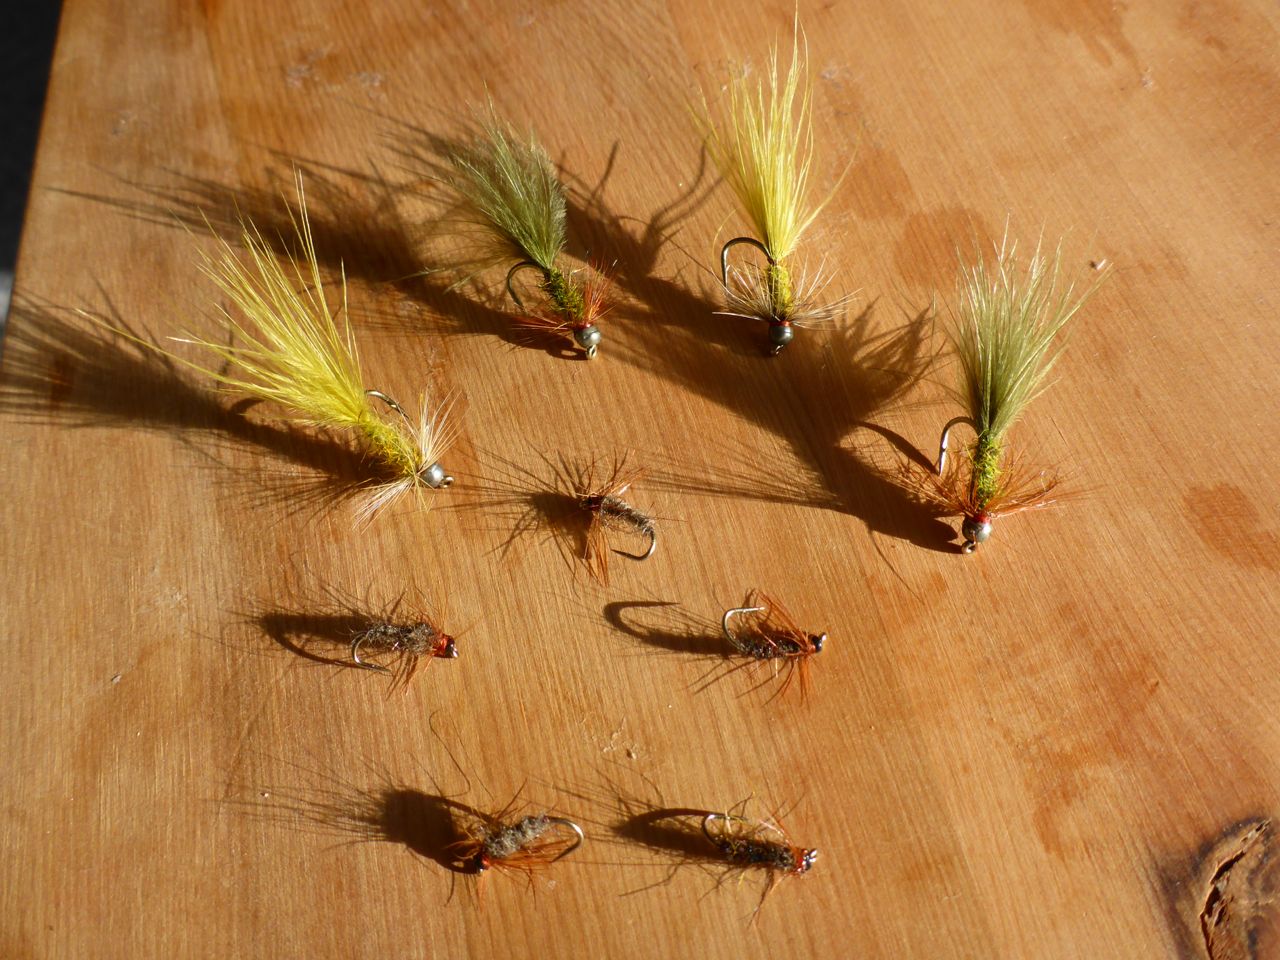 Buggers and spiders for Benmore. The spiders are tied on 14 Kamasan B 175 also with a 1.5mm tungsten bead, though I usually use a 2mm bead for my spiders.